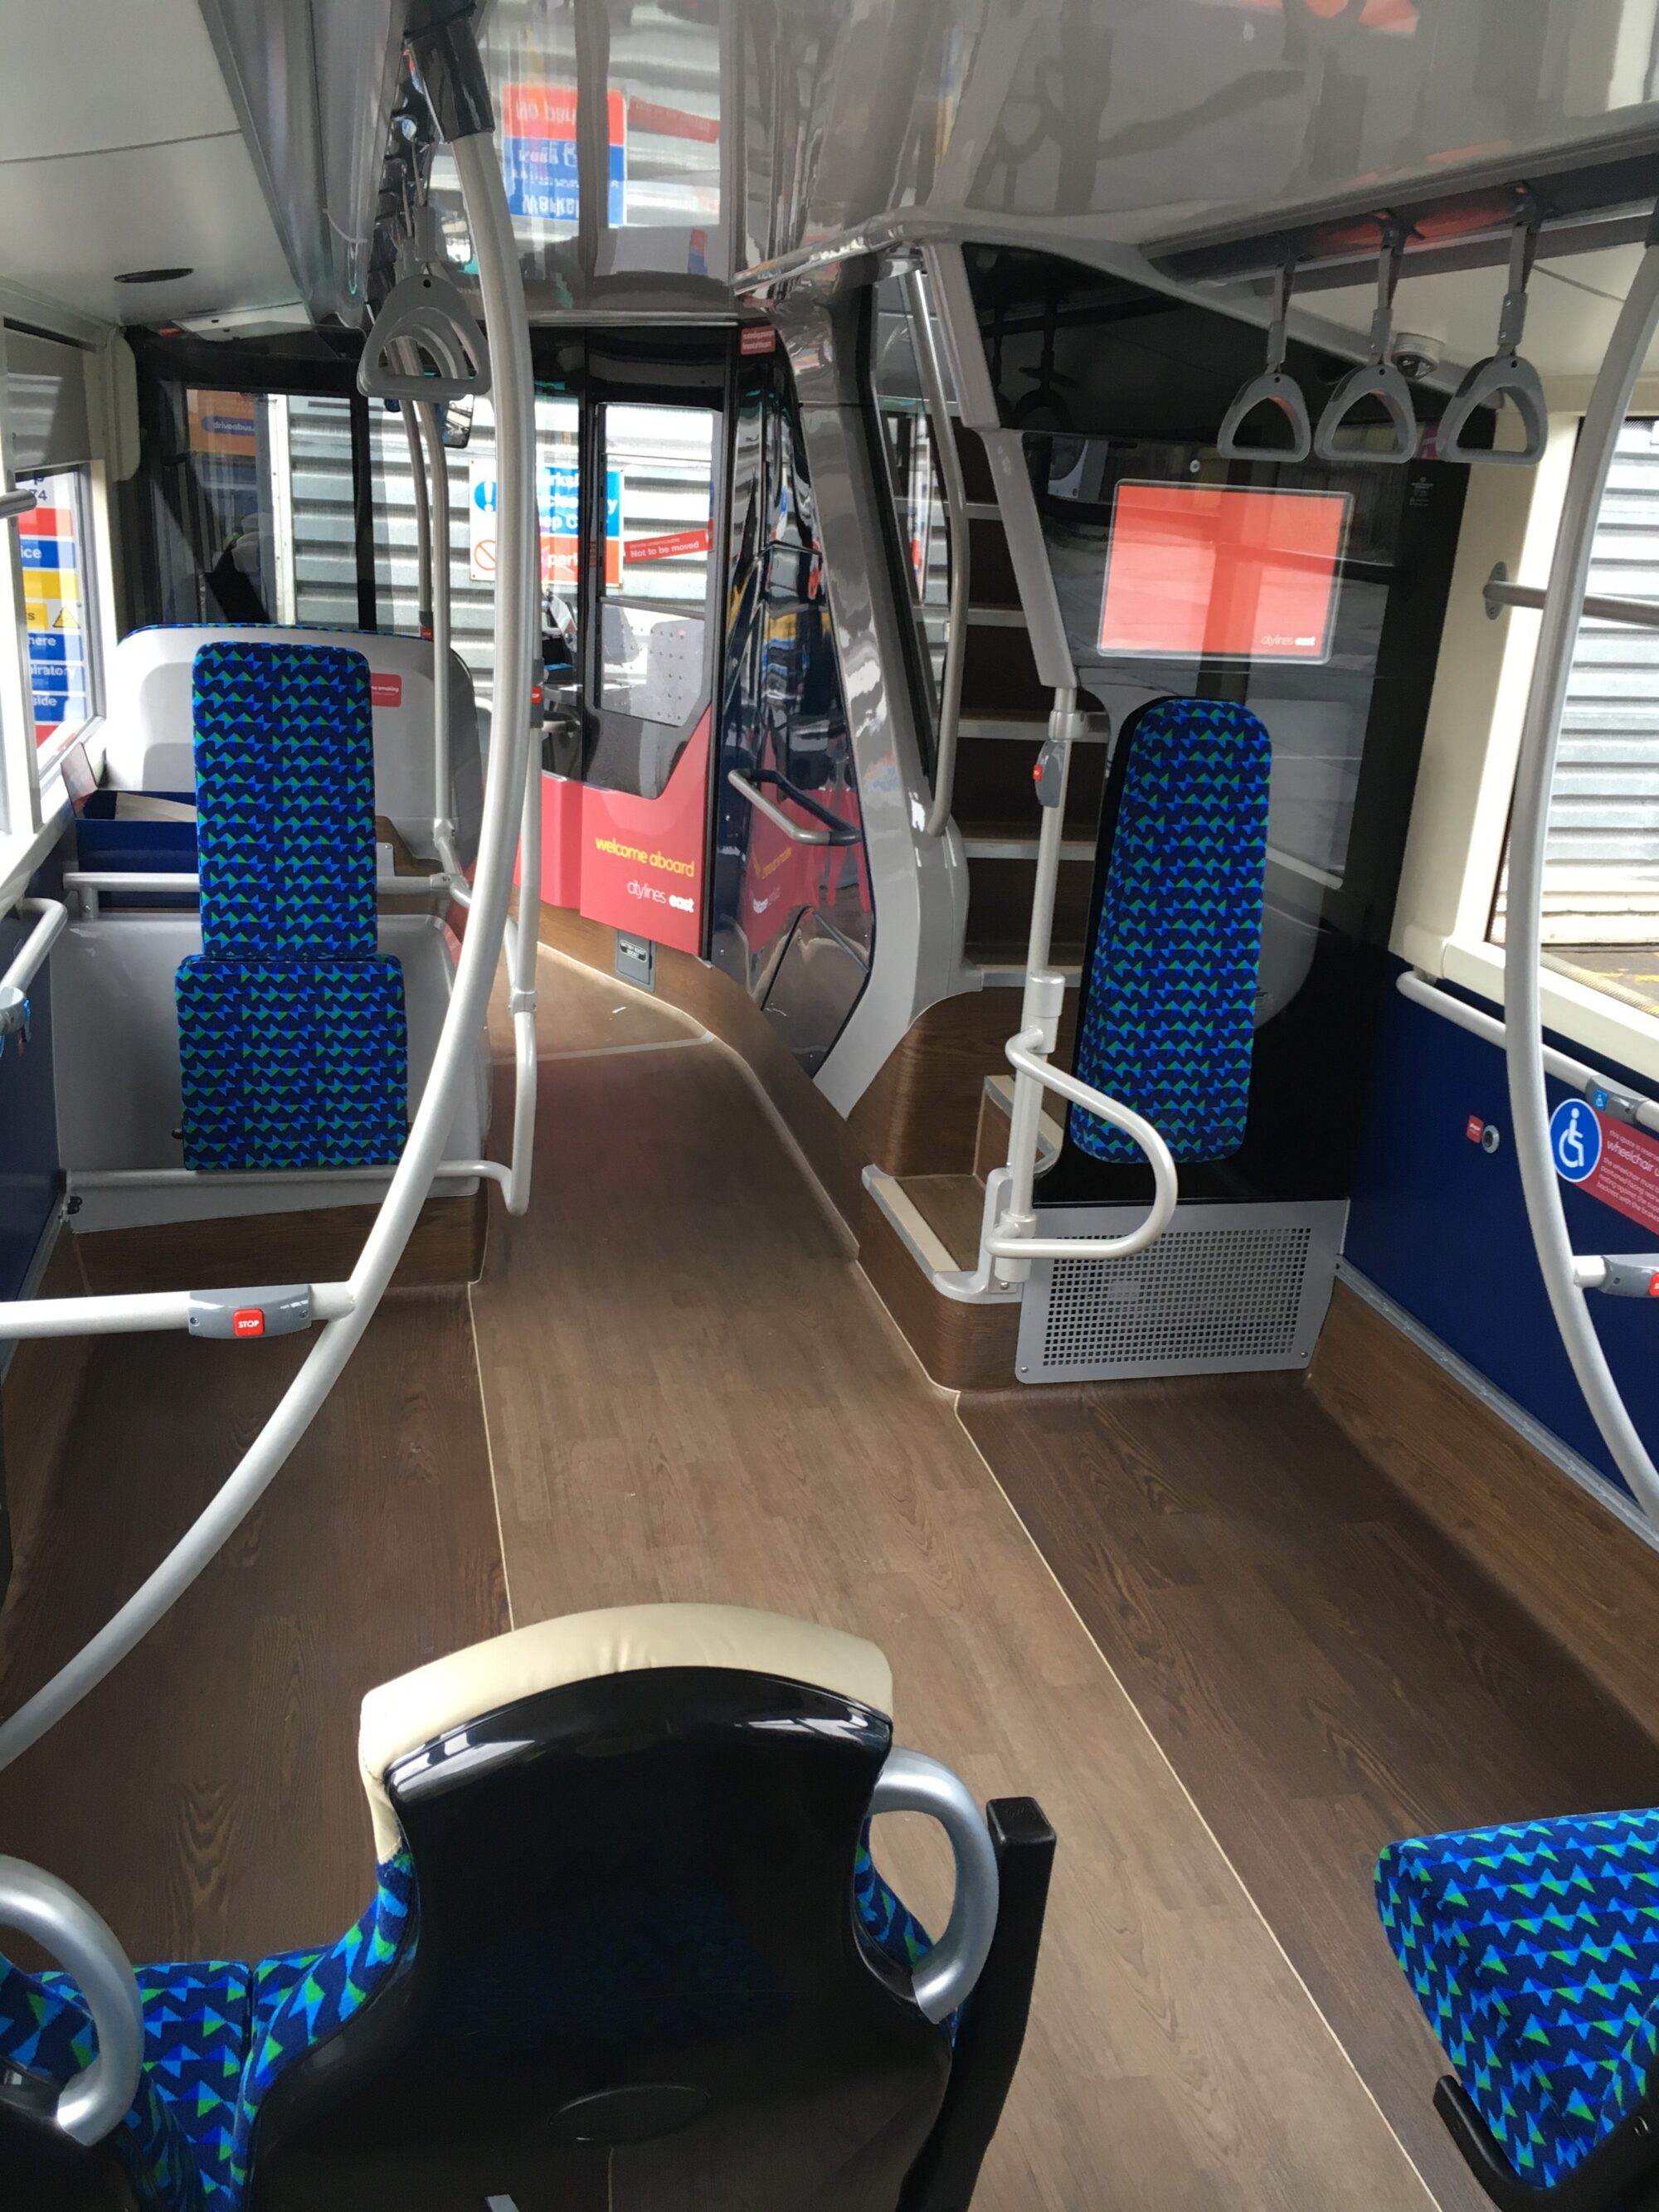 Priority spaces on the inside of a bus